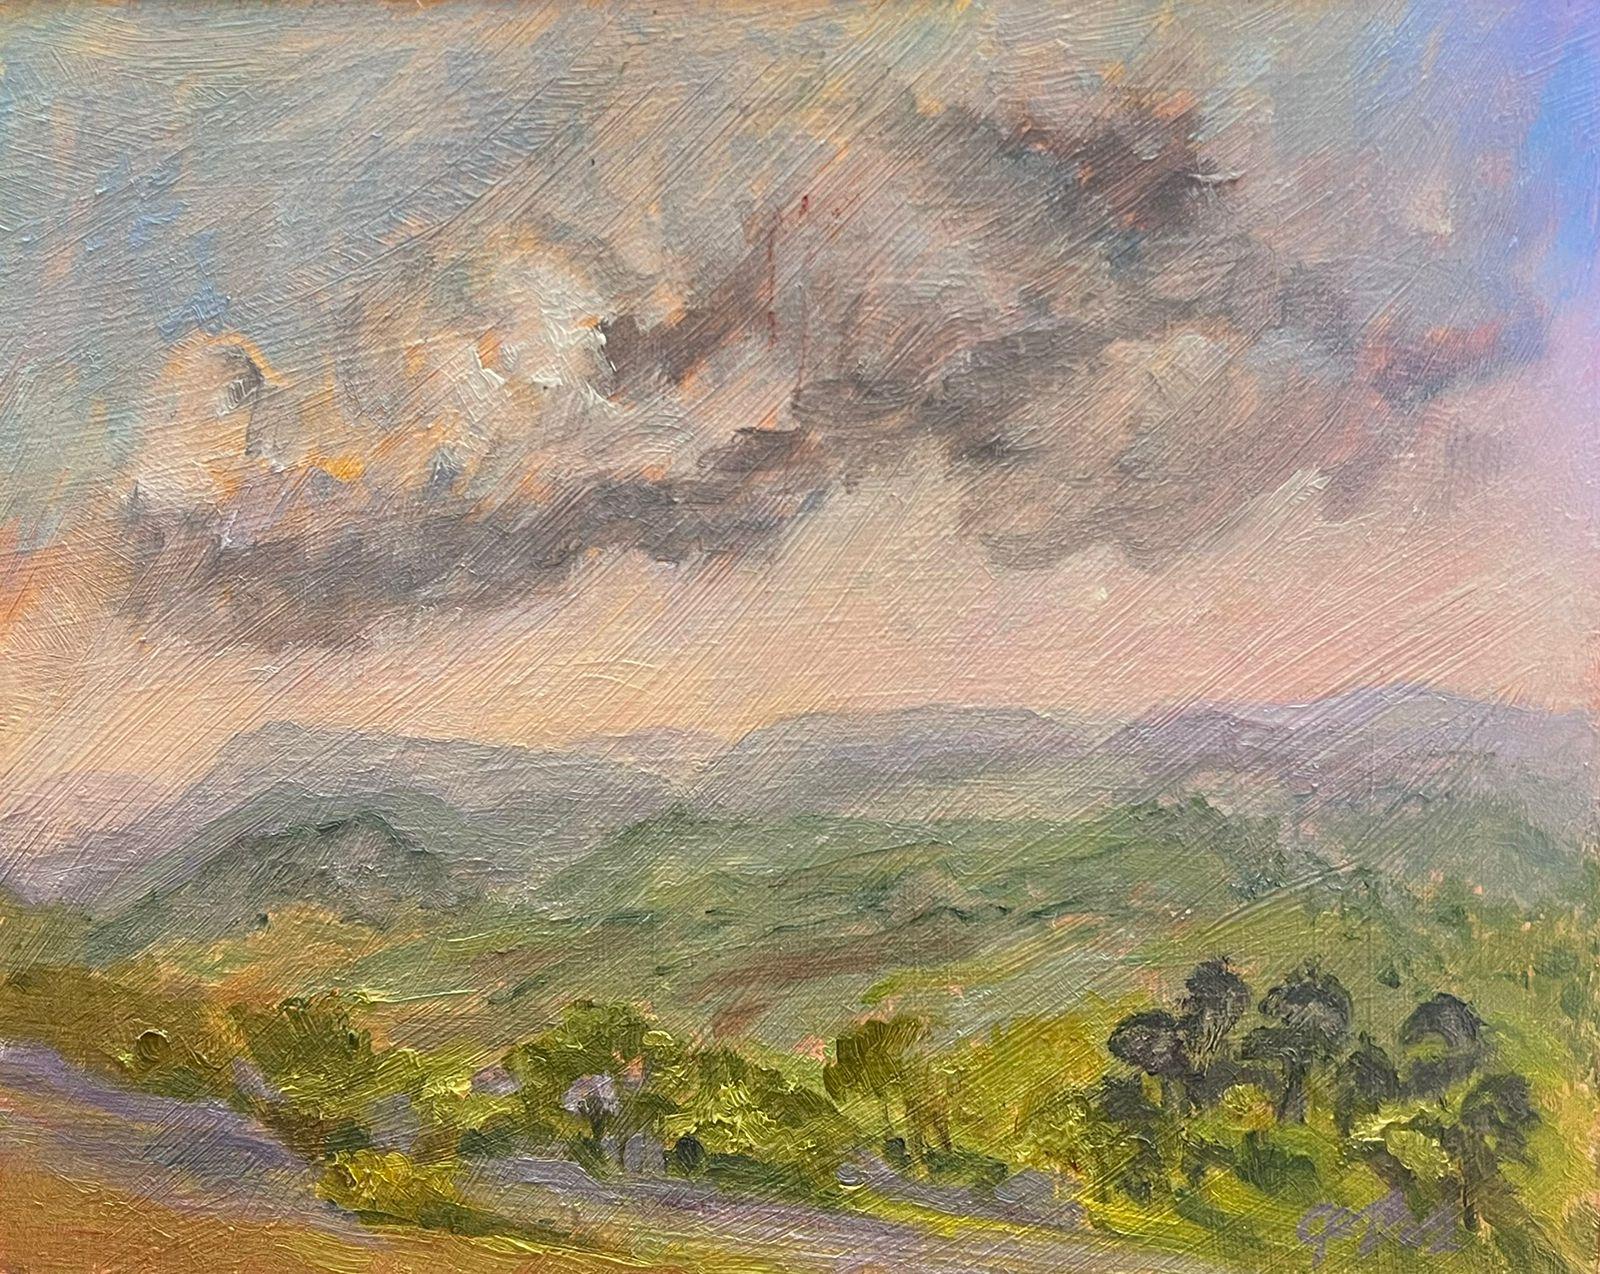 Geza Somerset-Paddon Landscape Painting - Large Grey Cloud Over Green Hill Landscape Contemporary British Oil Painting